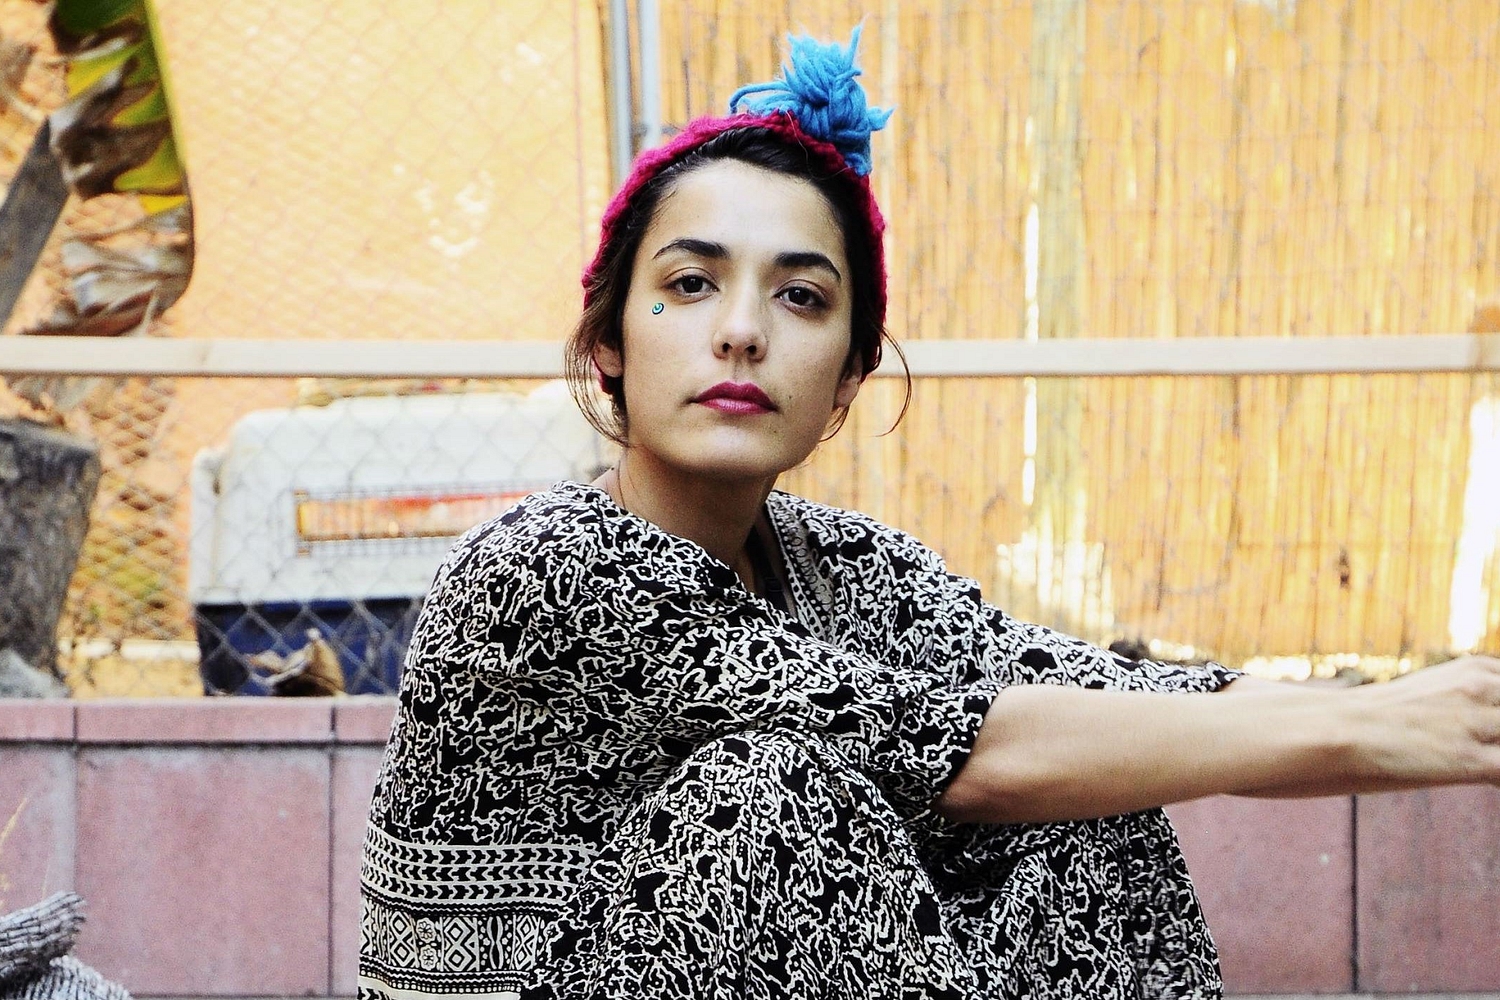 Jennylee: “I’ve thought over the years about trying to find my voice, the voice that’s me”